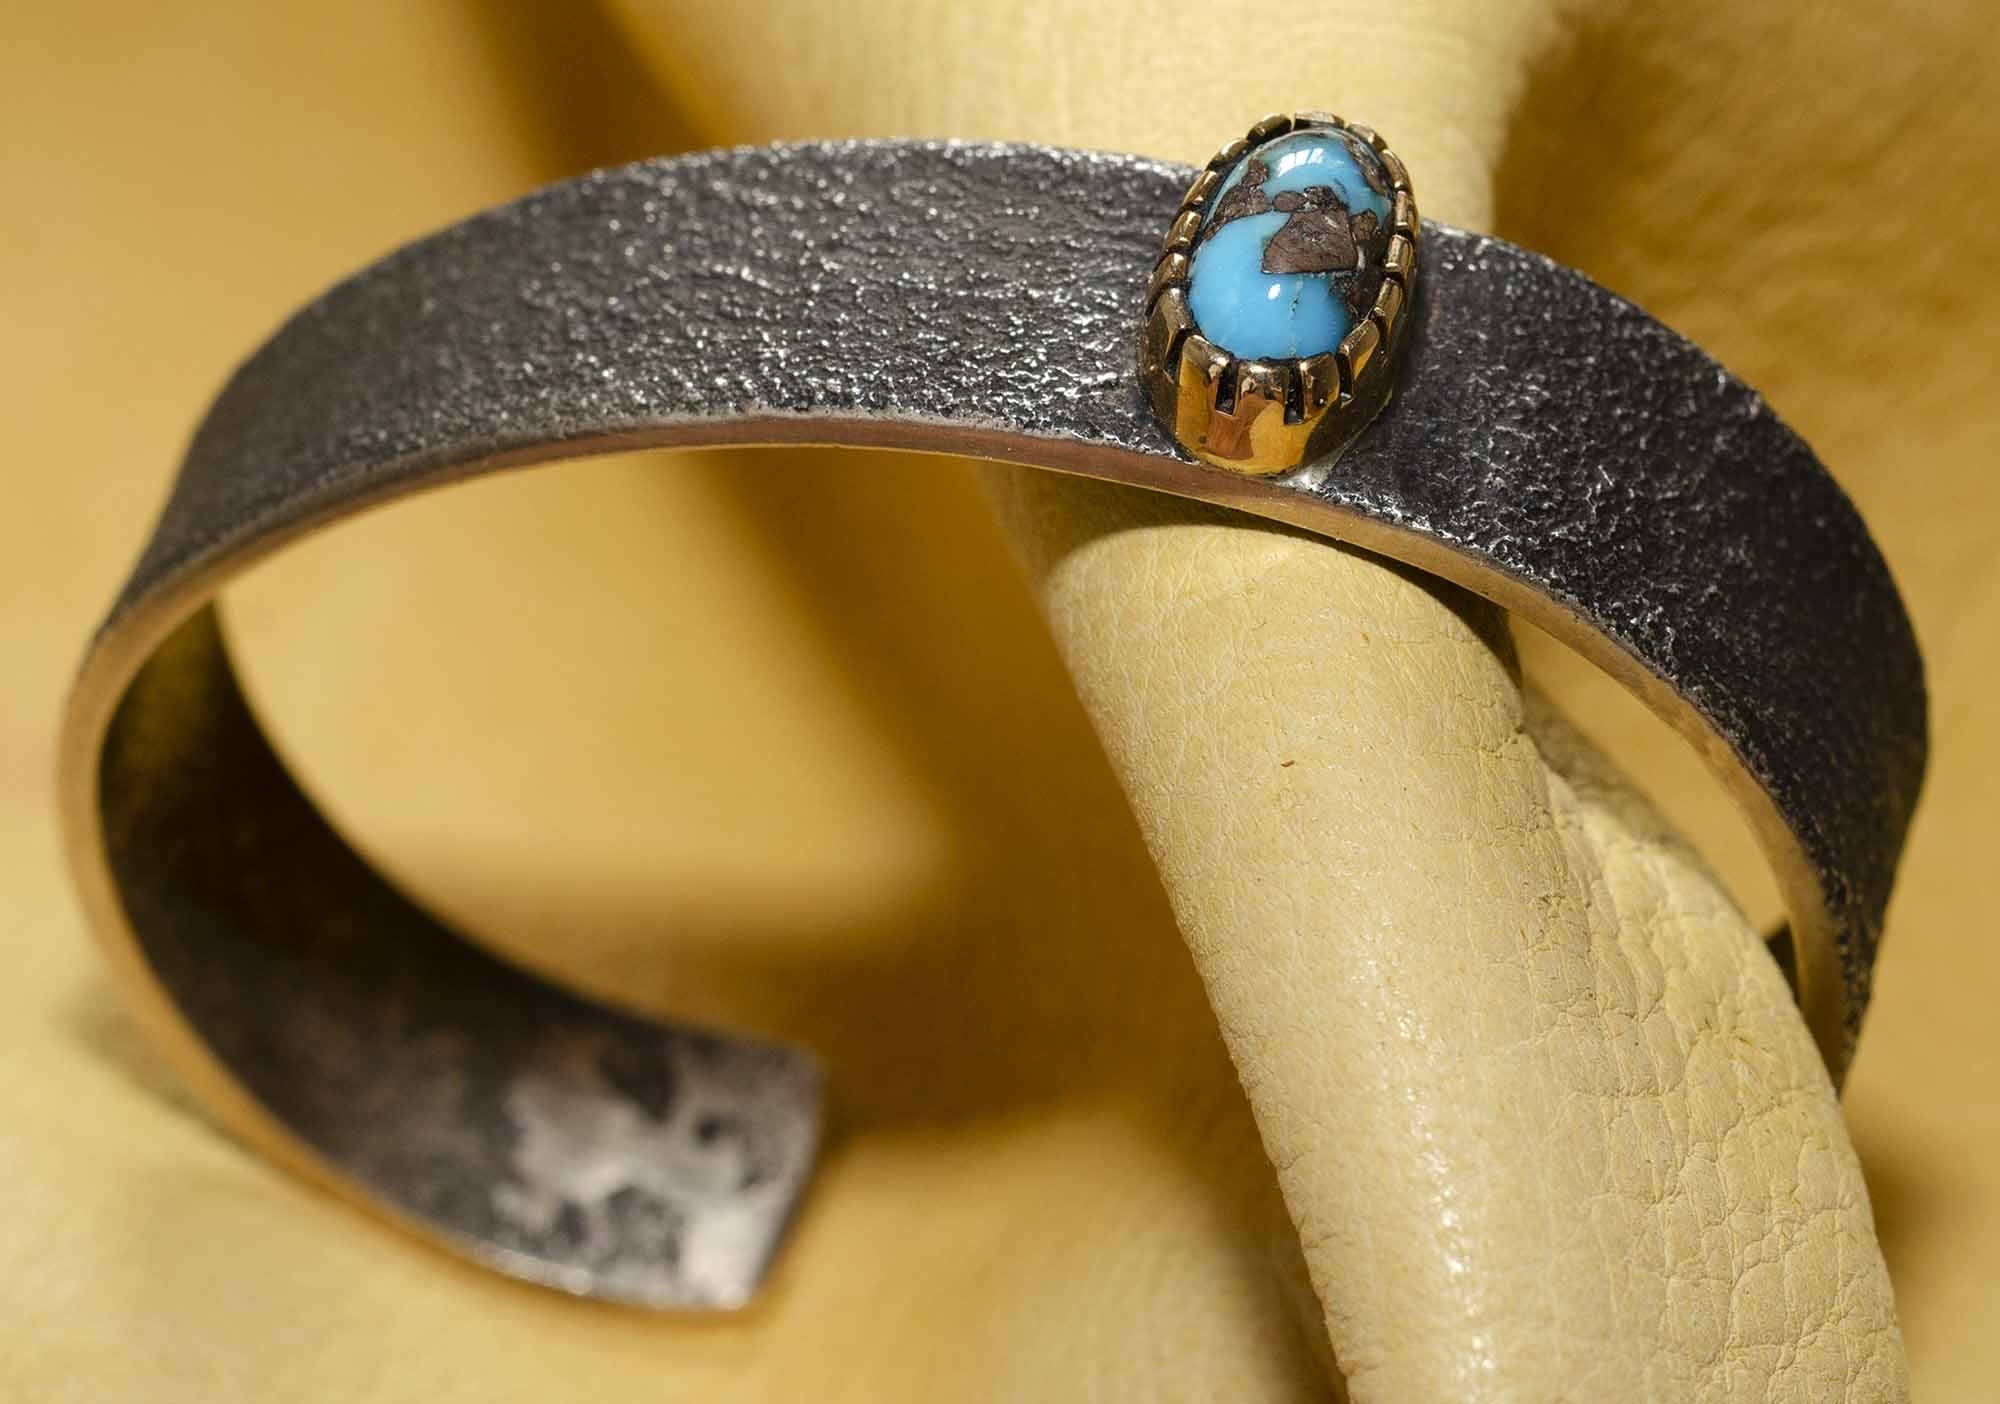 Bisbee Turquoise Bracelet 2 by Wes Willie